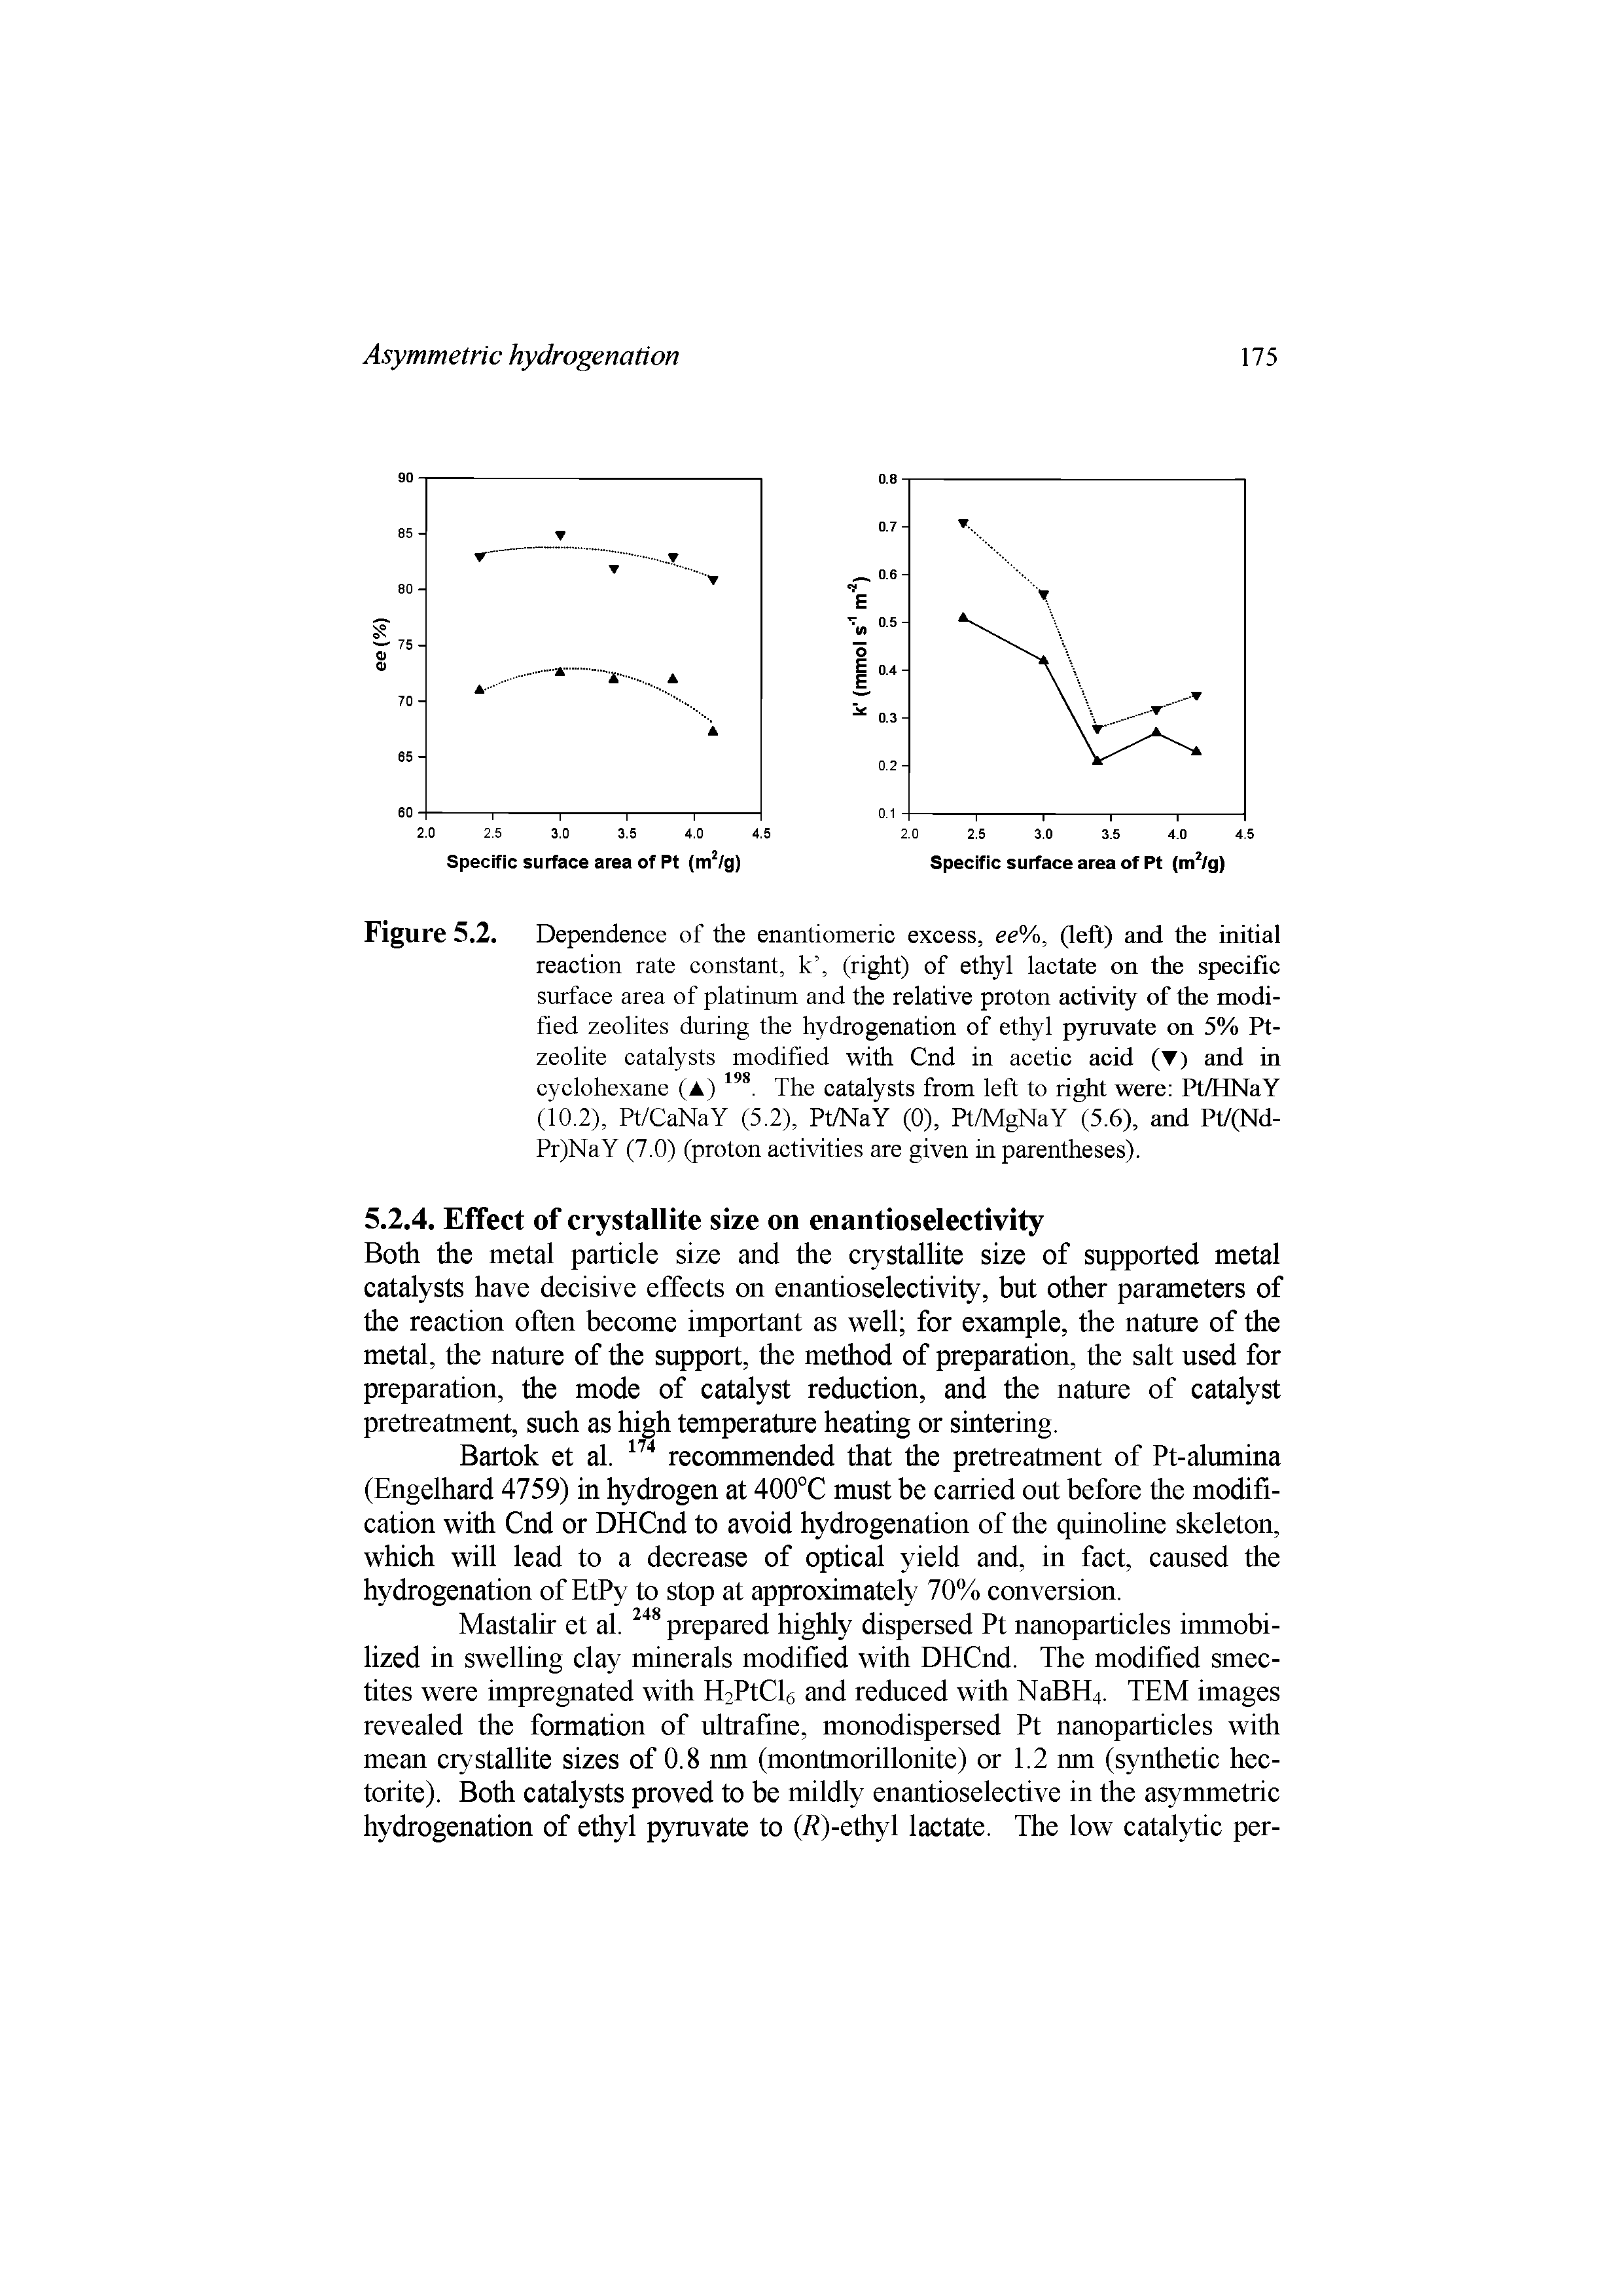 Figure 5.2. Dependence of the enantiomeric excess, ee%, (left) and the initial reaction rate constant, k , (right) of ethyl lactate on the specific surface area of platinum and the relative proton activity of the modified zeolites during the hydrogenation of ethyl pyruvate on 5% Pt-zeolite catalysts modified with Cnd in acetic acid (T) and in cyclohexane (A) The catalysts from left to right were Pt/HNaY (10.2), Pt/CaNaY (5.2), Pt/NaY (0), Pt/MgNaY (5.6), and Pt/(Nd-Pr)NaY (7.0) (proton activities are given in parentheses).